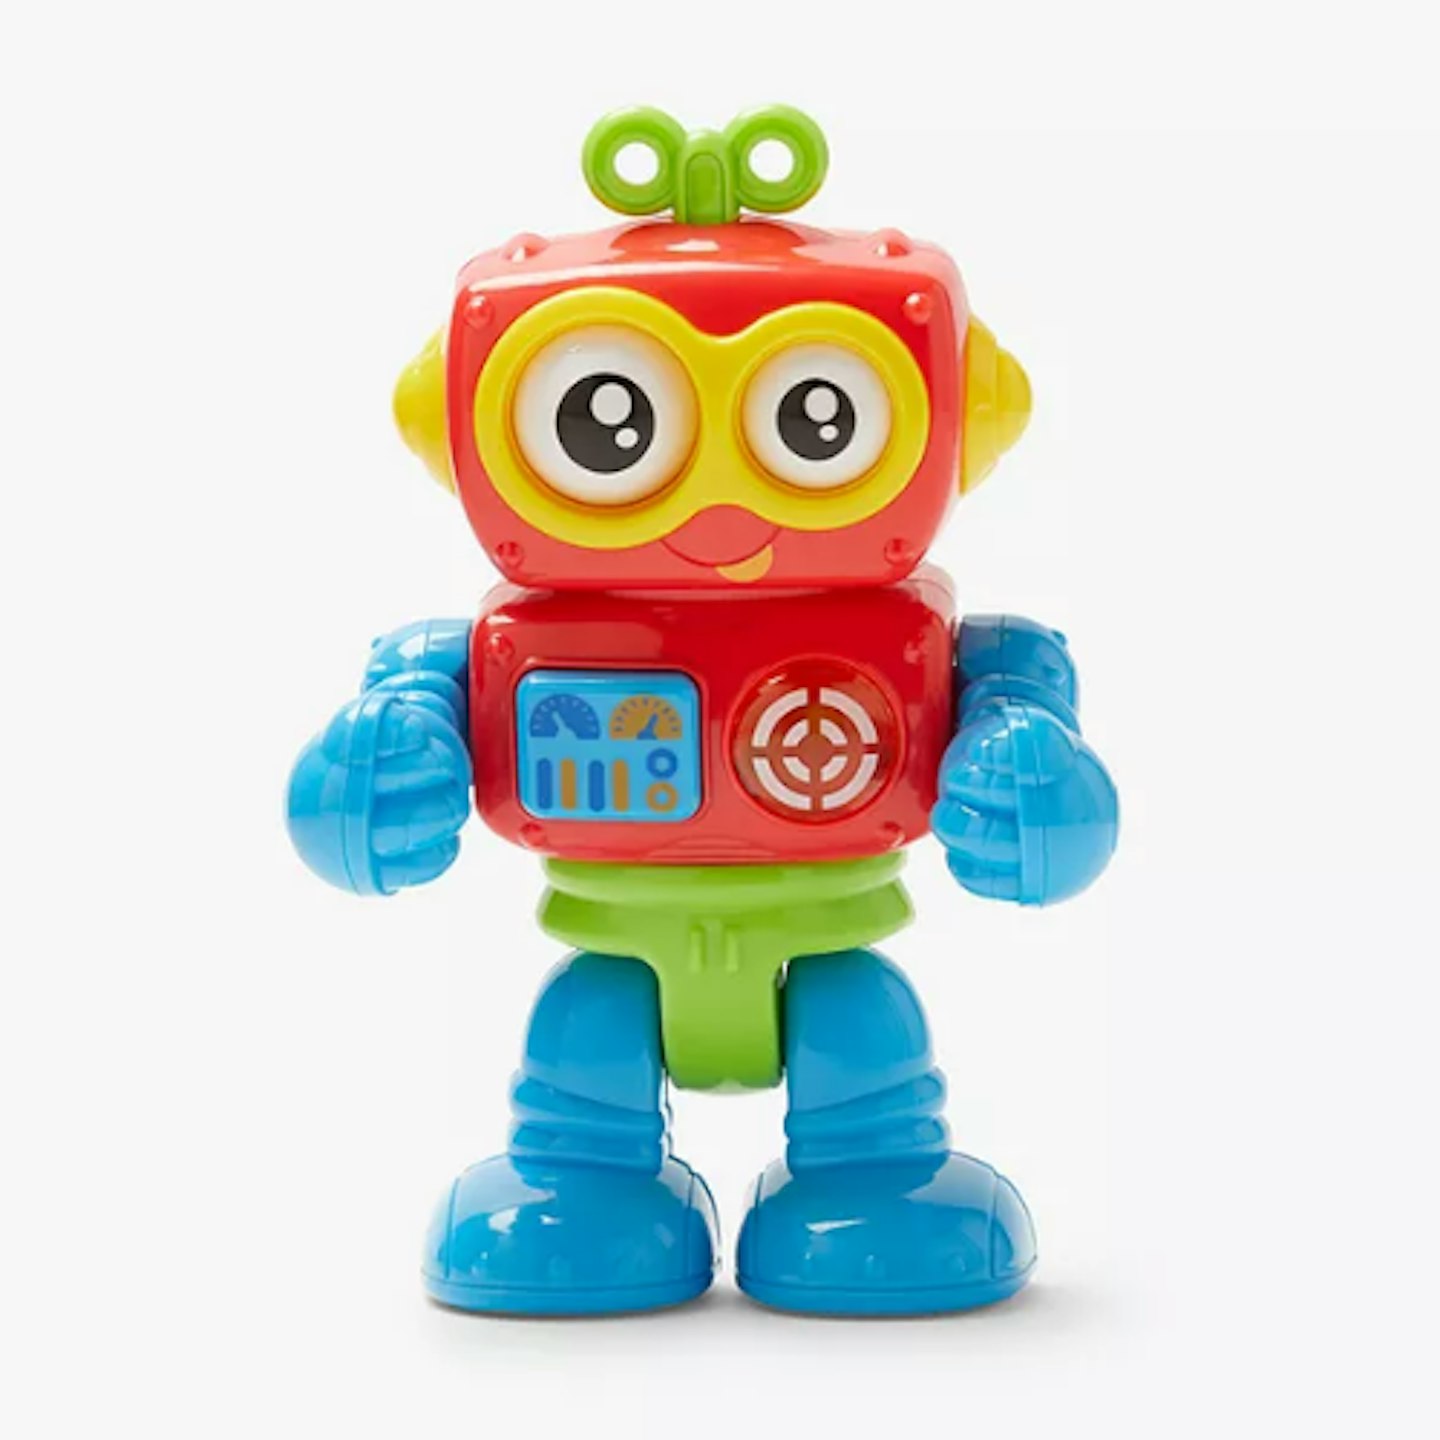 Robot Toys for Young Kids – Inventors of Tomorrow